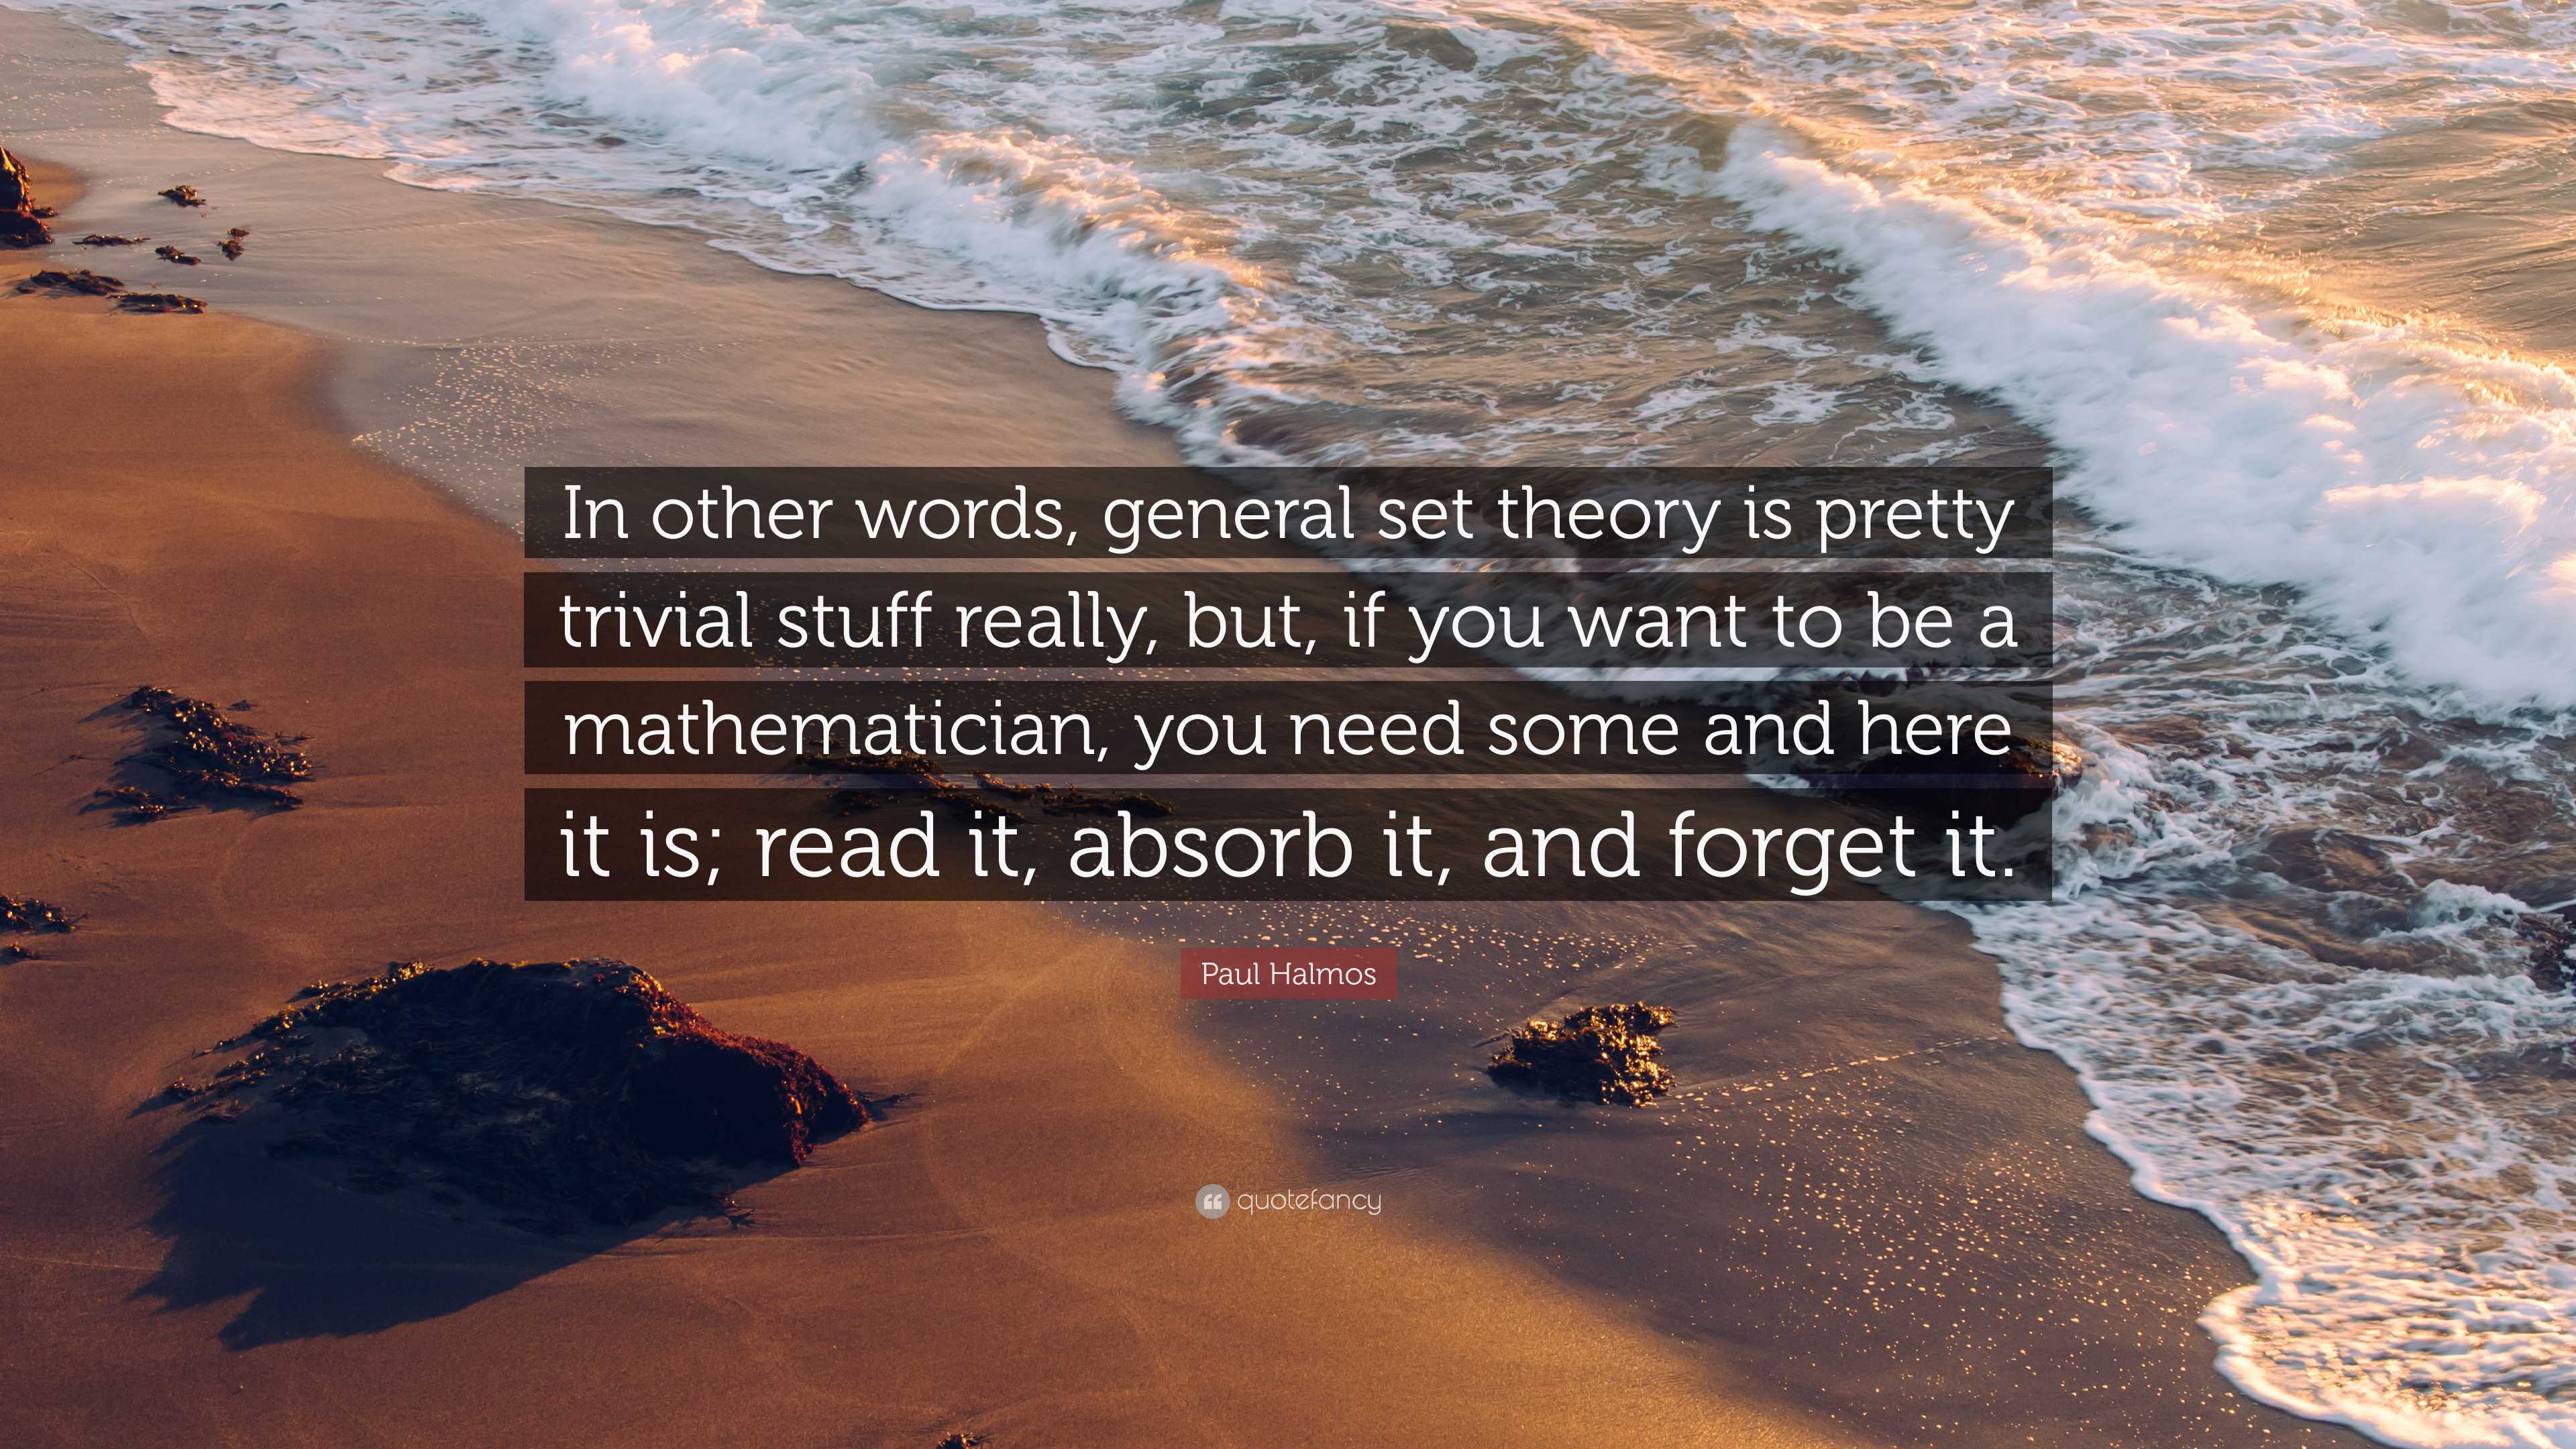 Paul Halmos Quote: “In other words, general set theory is pretty trivial  stuff really, but, if you want to be a mathematician, you need some”